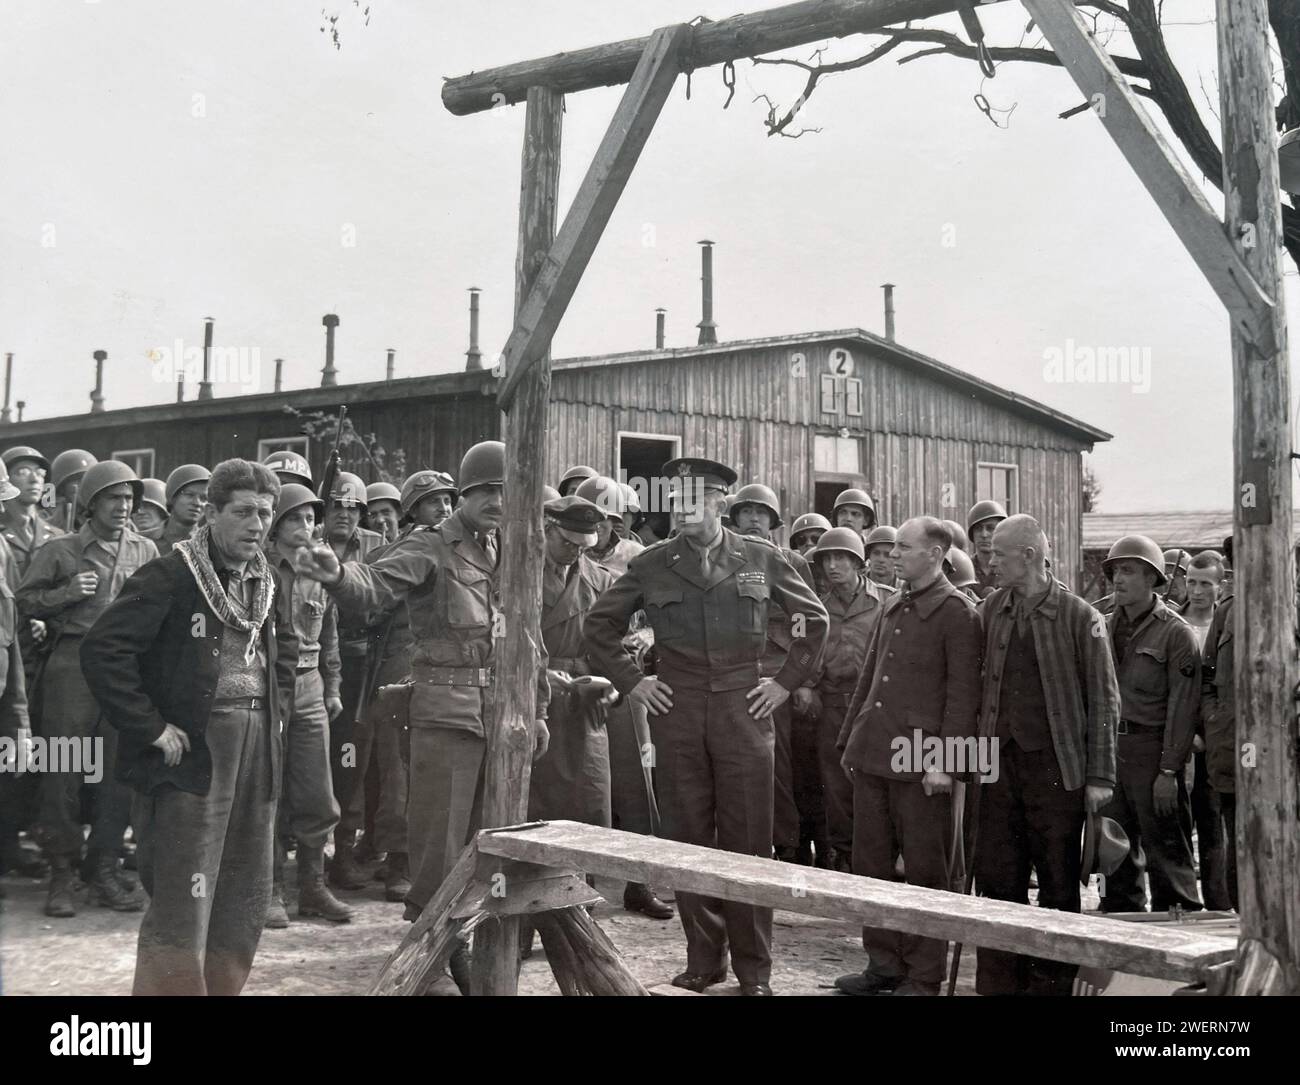 OHRDRUF CONCENTRATION CAMP, Thuringia, Germany. General Dwight D. Eisenhower  visits the camp shortly after its liberation on 4 April 1945 by US Fourth Armoured Division and the 890th Infantry Division.  Here a camp survivor talks to Eisenhower next to the camp gallows. Stock Photo